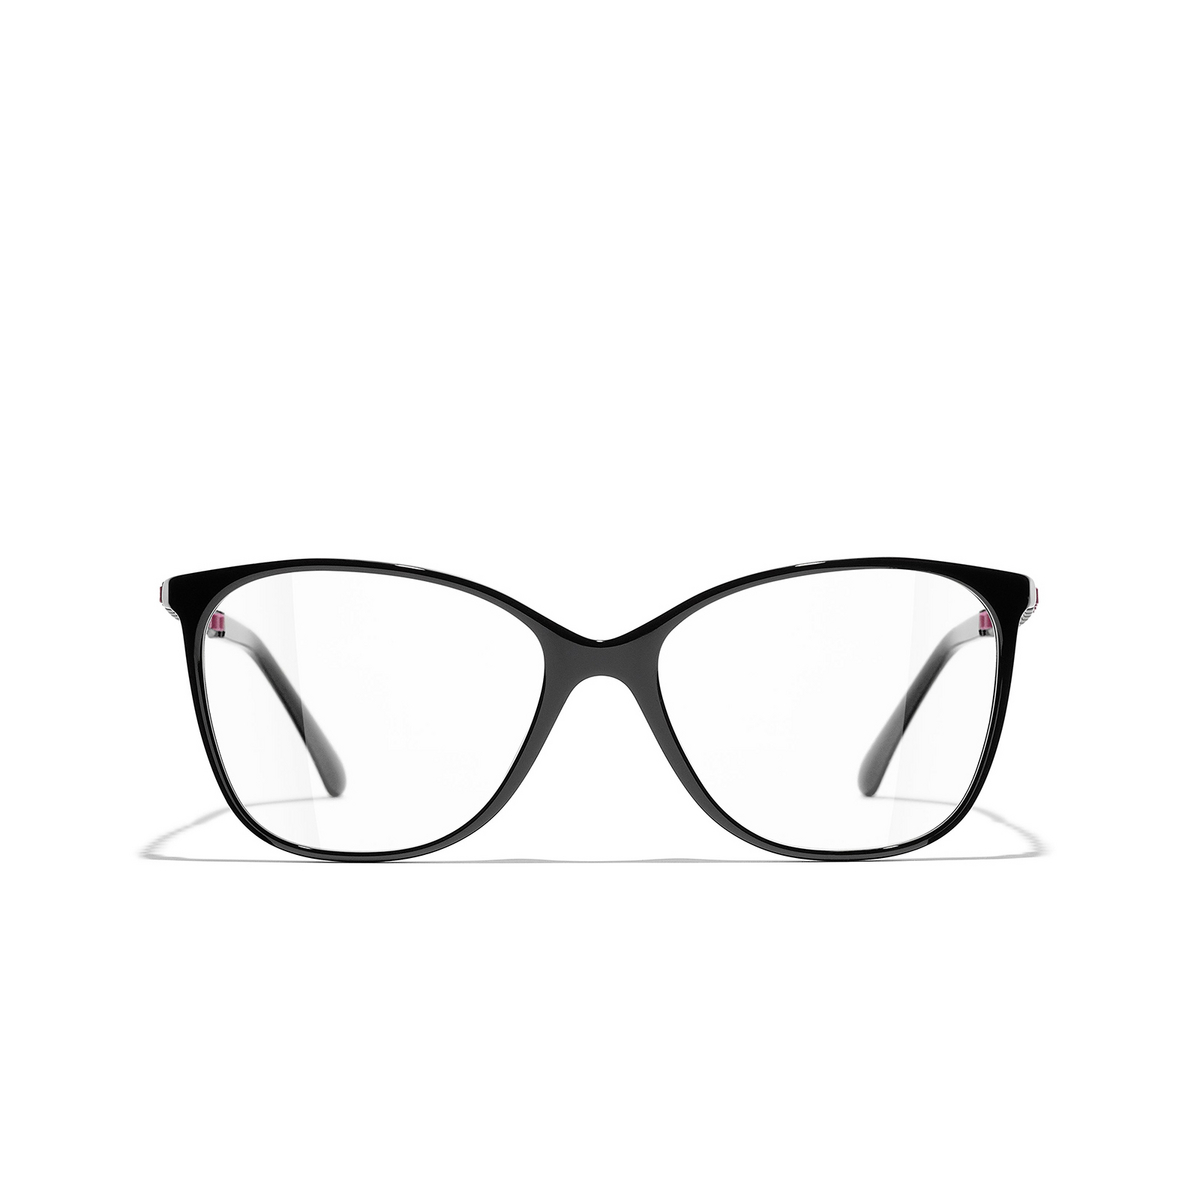 CHANEL square Eyeglasses 1711 Black & Pink - front view